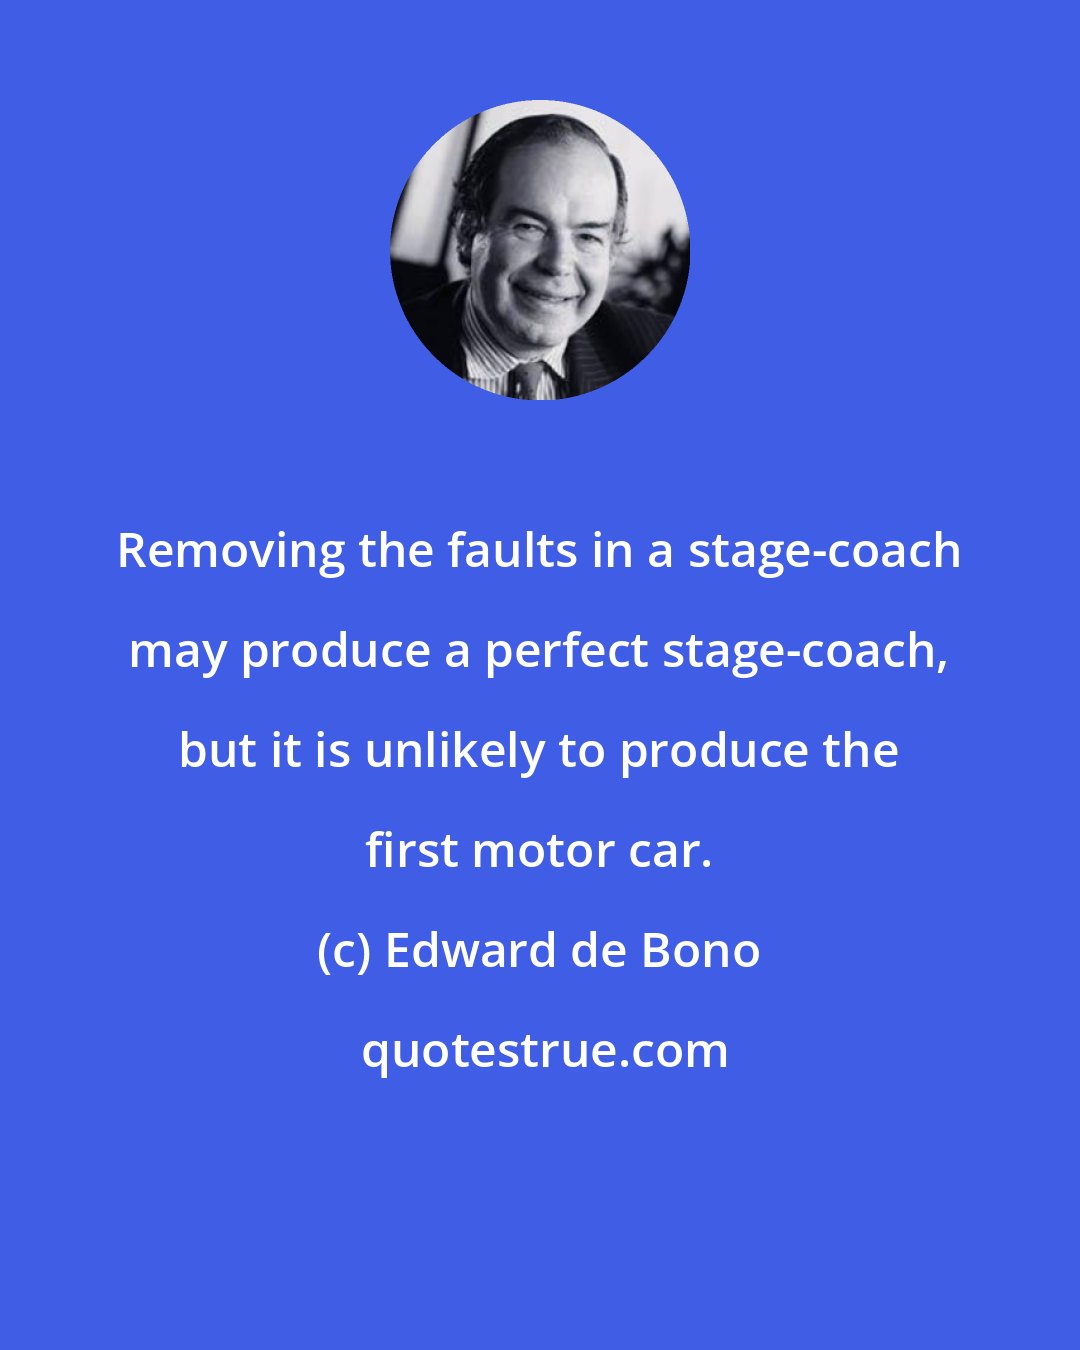 Edward de Bono: Removing the faults in a stage-coach may produce a perfect stage-coach, but it is unlikely to produce the first motor car.